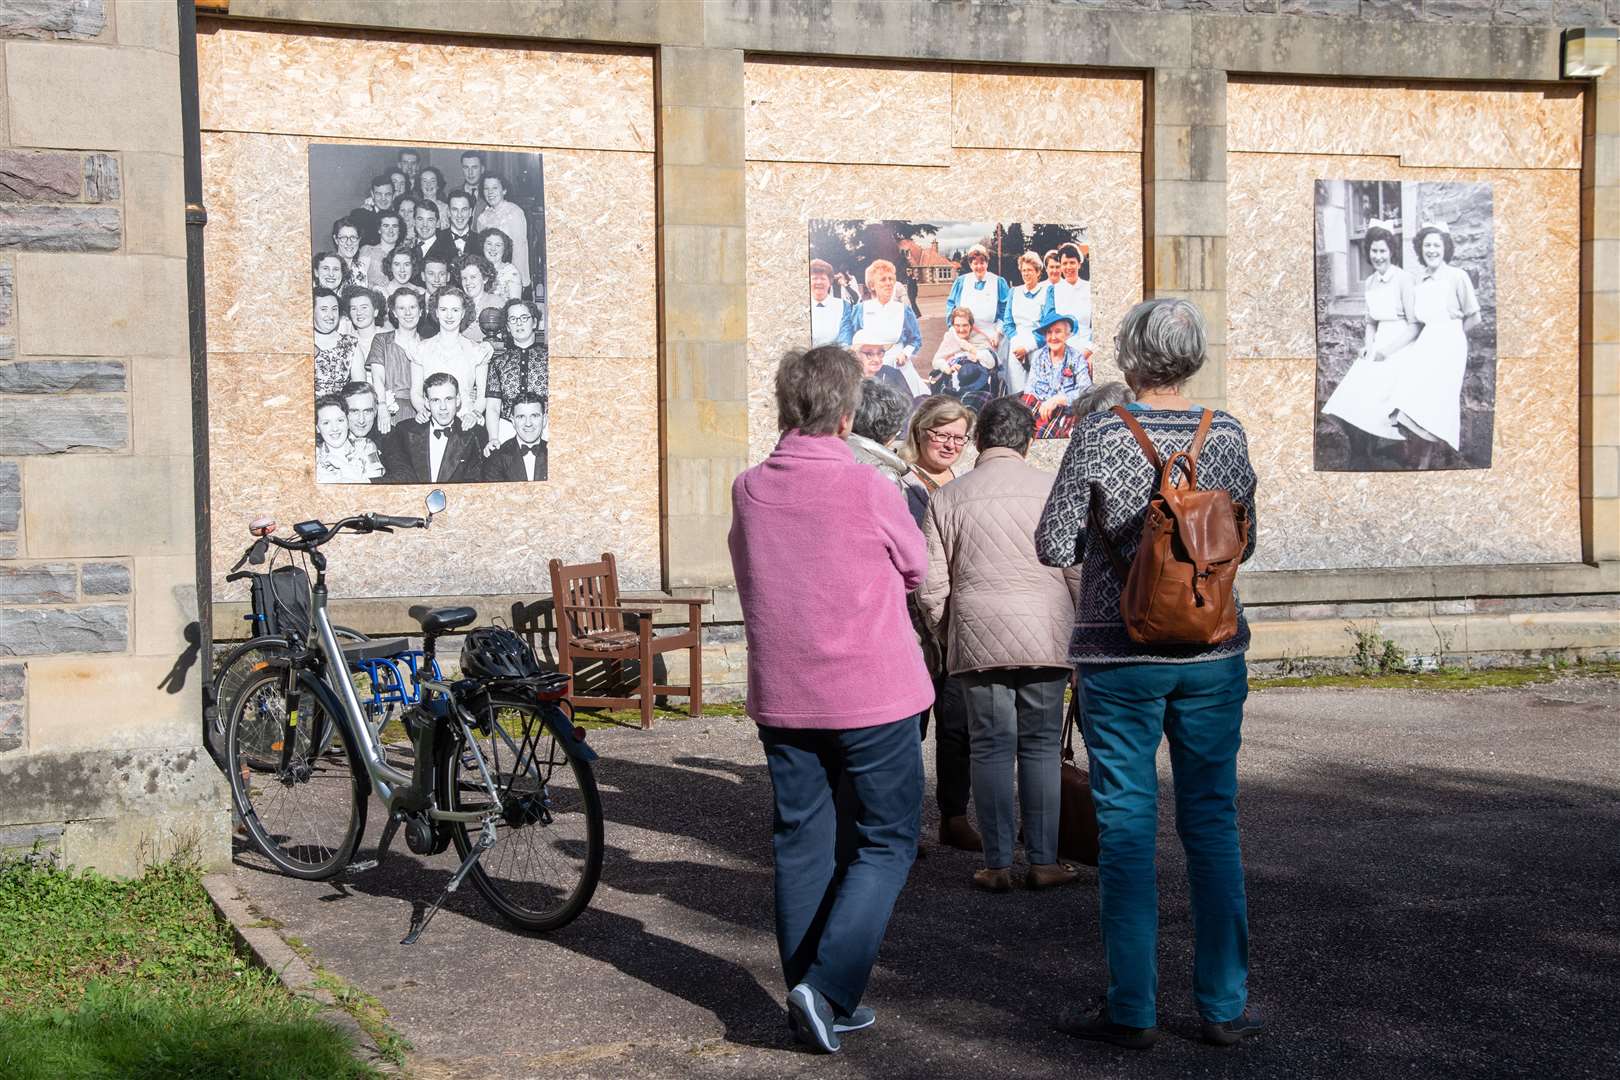 Attendees admiring the photographic display. Picture: Daniel Forsyth